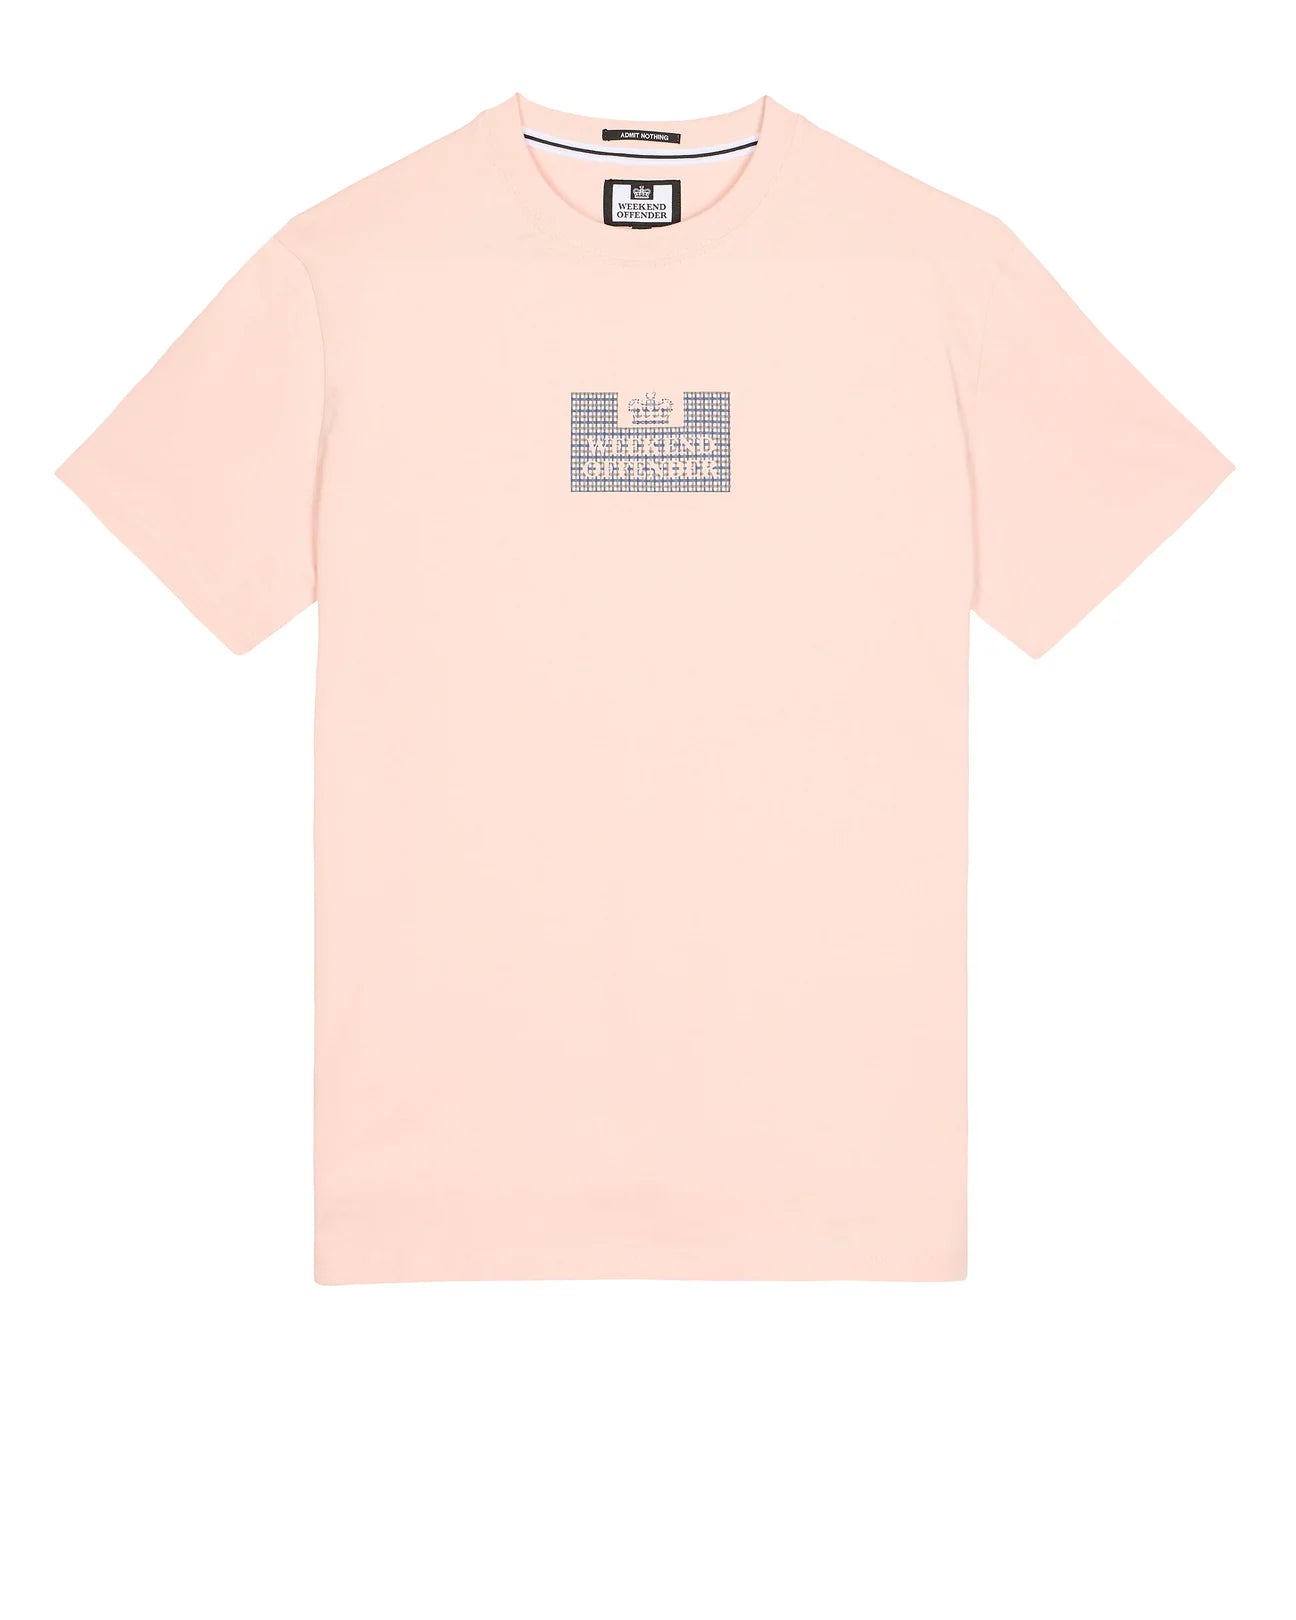 Weekend Offender Dygas Tee Peachy / House Check - Raw Menswear